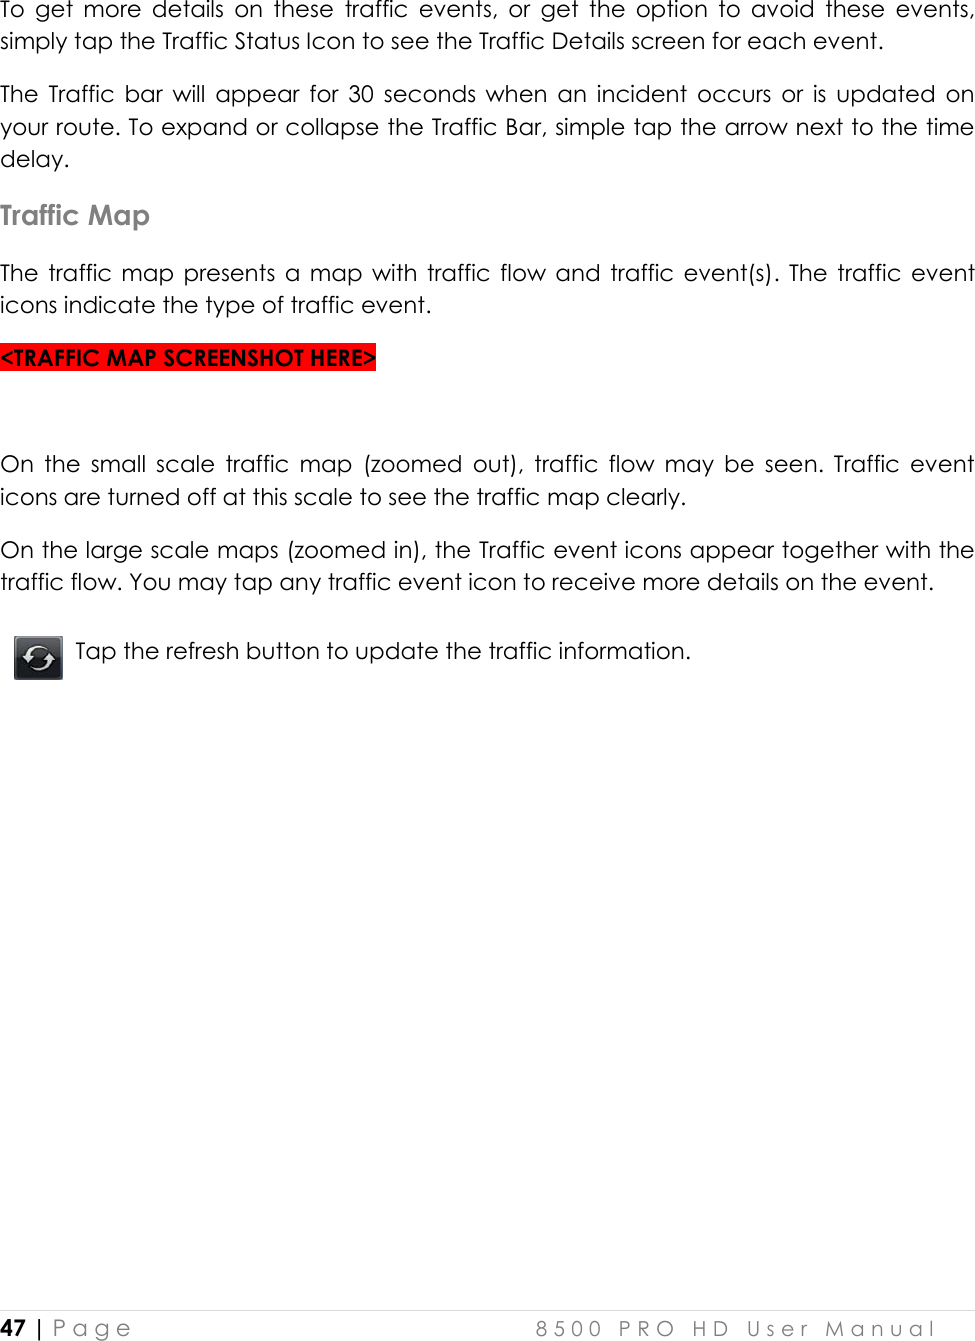  47 | P a g e    8 5 0 0   P R O   H D   U s e r   M a n u a l   To  get  more  details  on  these  traffic  events,  or  get  the  option  to  avoid  these  events, simply tap the Traffic Status Icon to see the Traffic Details screen for each event.  The  Traffic  bar  will  appear  for  30  seconds  when  an  incident  occurs  or  is  updated  on your route. To expand or collapse the Traffic Bar, simple tap the arrow next to the time delay.  Traffic Map The  traffic  map  presents  a  map  with  traffic  flow and  traffic event(s).  The  traffic  event icons indicate the type of traffic event.  &lt;TRAFFIC MAP SCREENSHOT HERE&gt;  On  the  small  scale  traffic  map  (zoomed  out),  traffic  flow  may  be  seen.  Traffic  event icons are turned off at this scale to see the traffic map clearly.  On the large scale maps (zoomed in), the Traffic event icons appear together with the traffic flow. You may tap any traffic event icon to receive more details on the event.   Tap the refresh button to update the traffic information.     